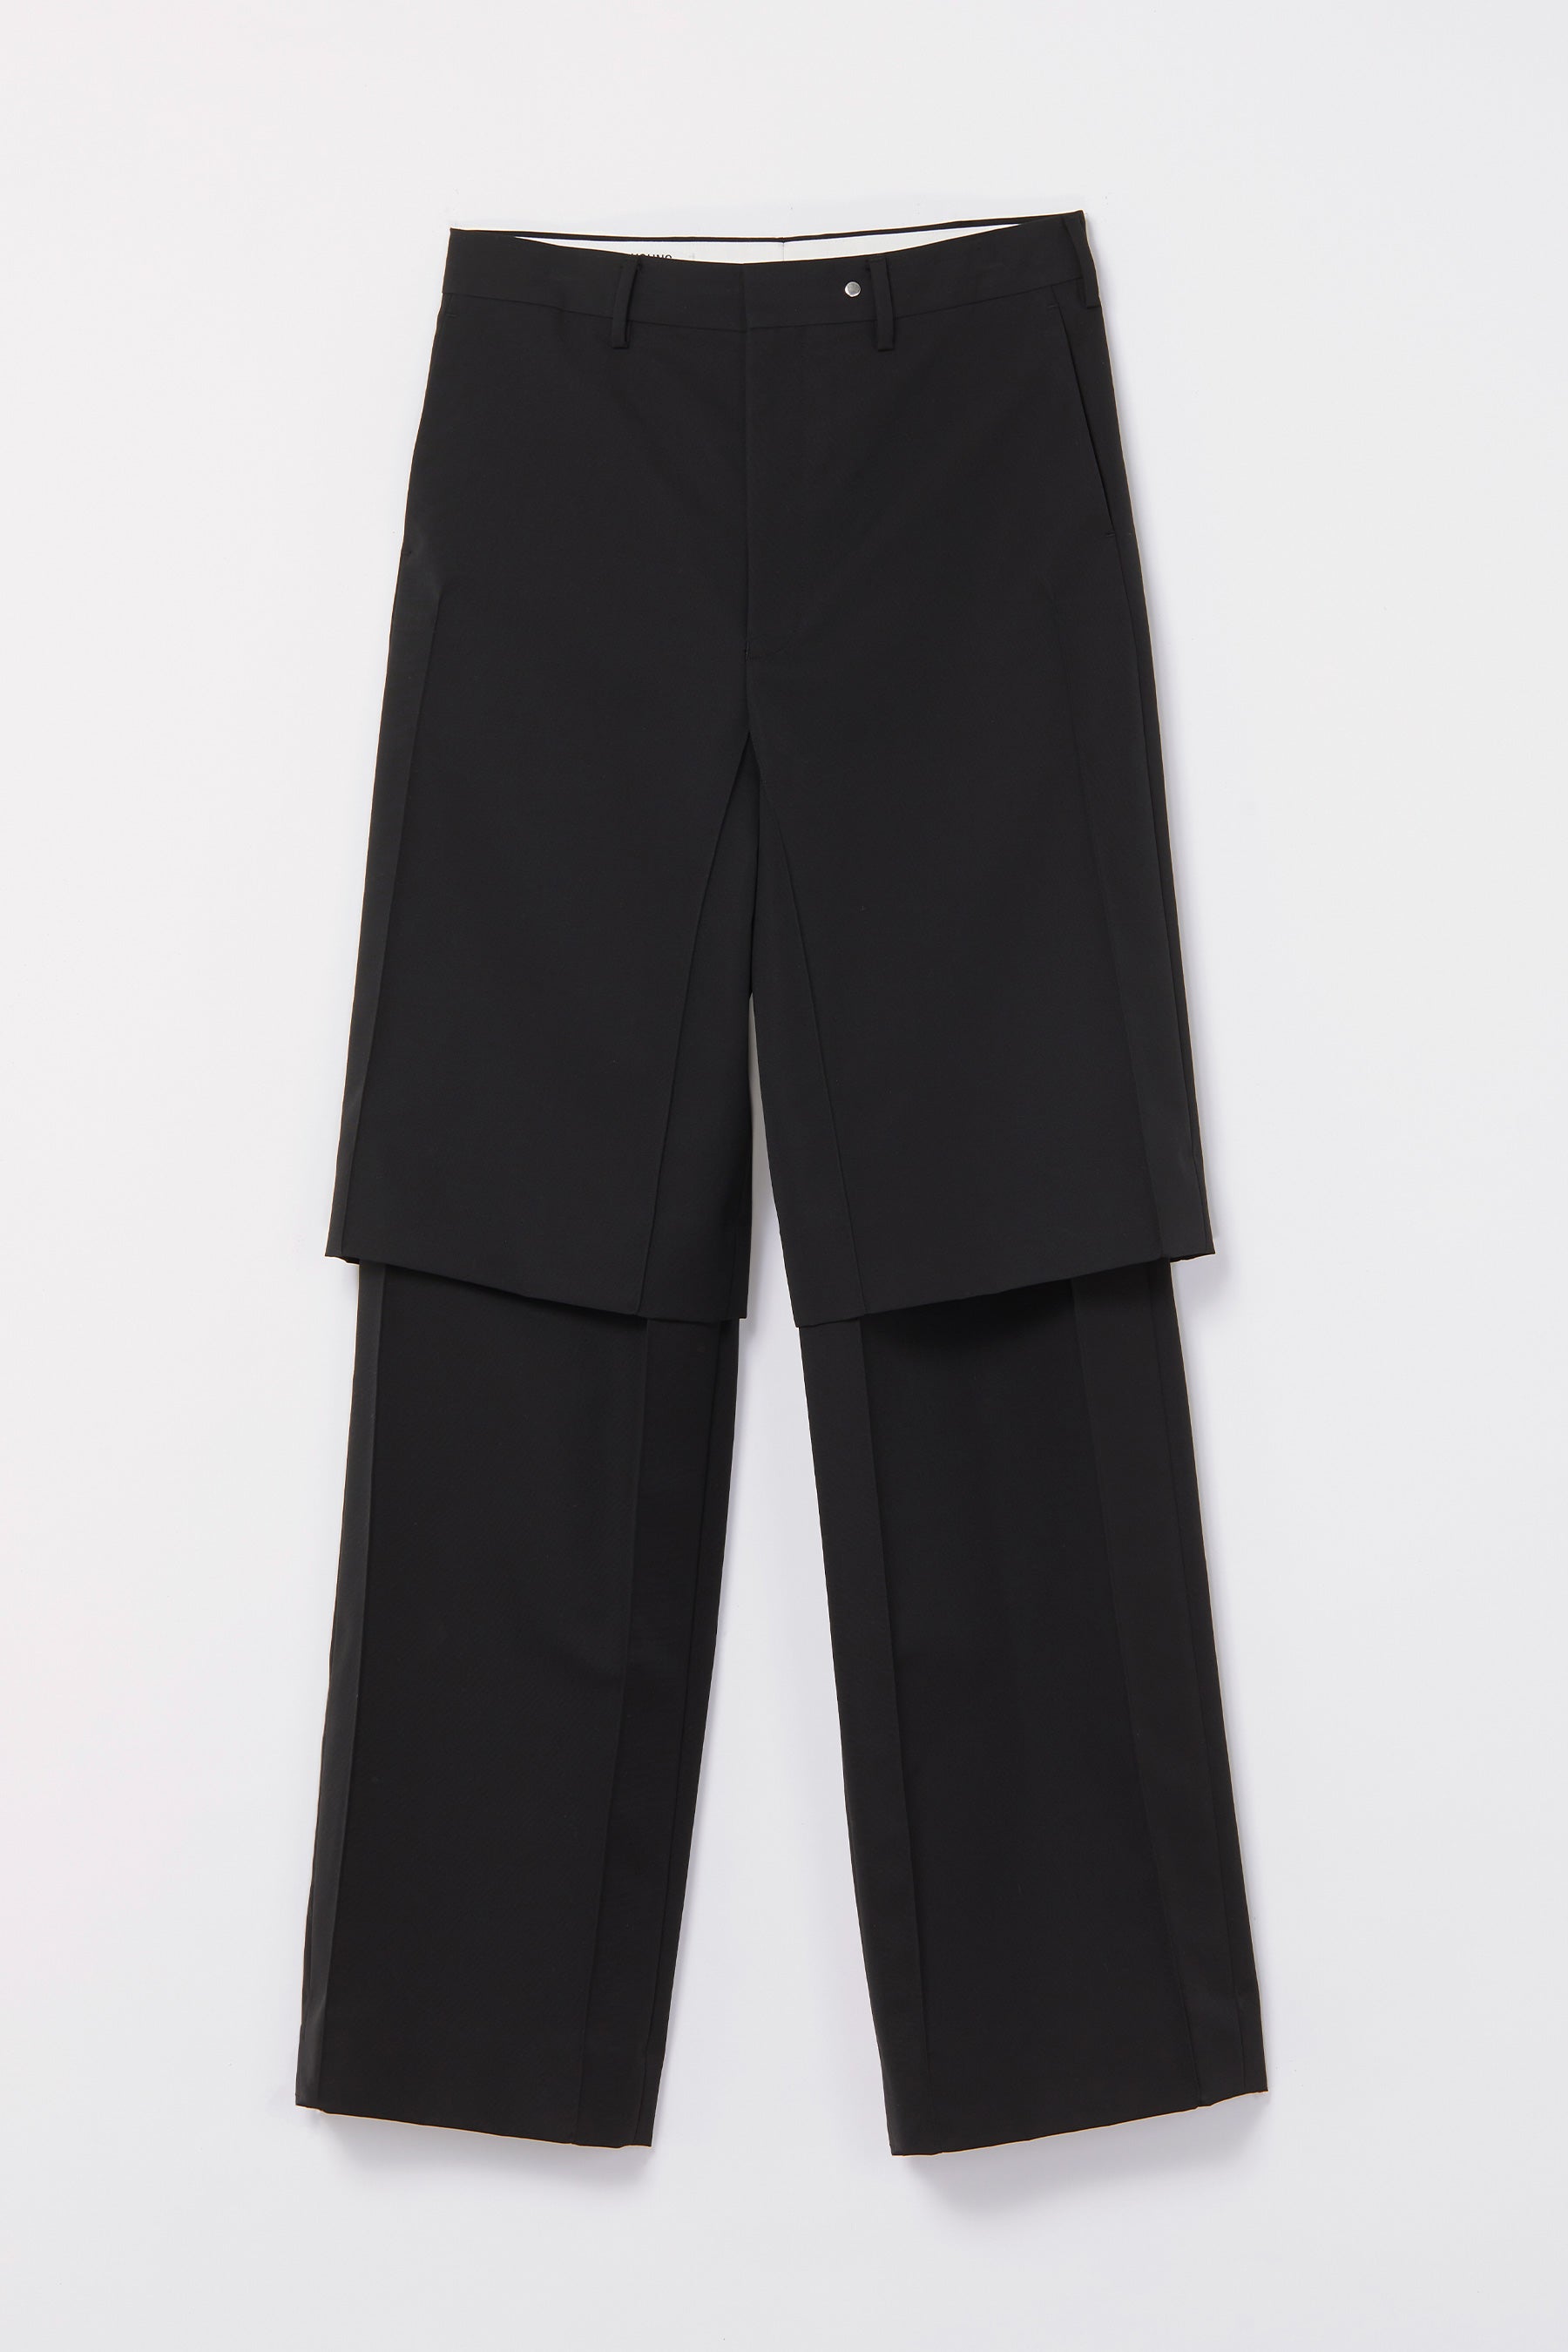 Black Wool Double Layered Cuboid Wide Pants